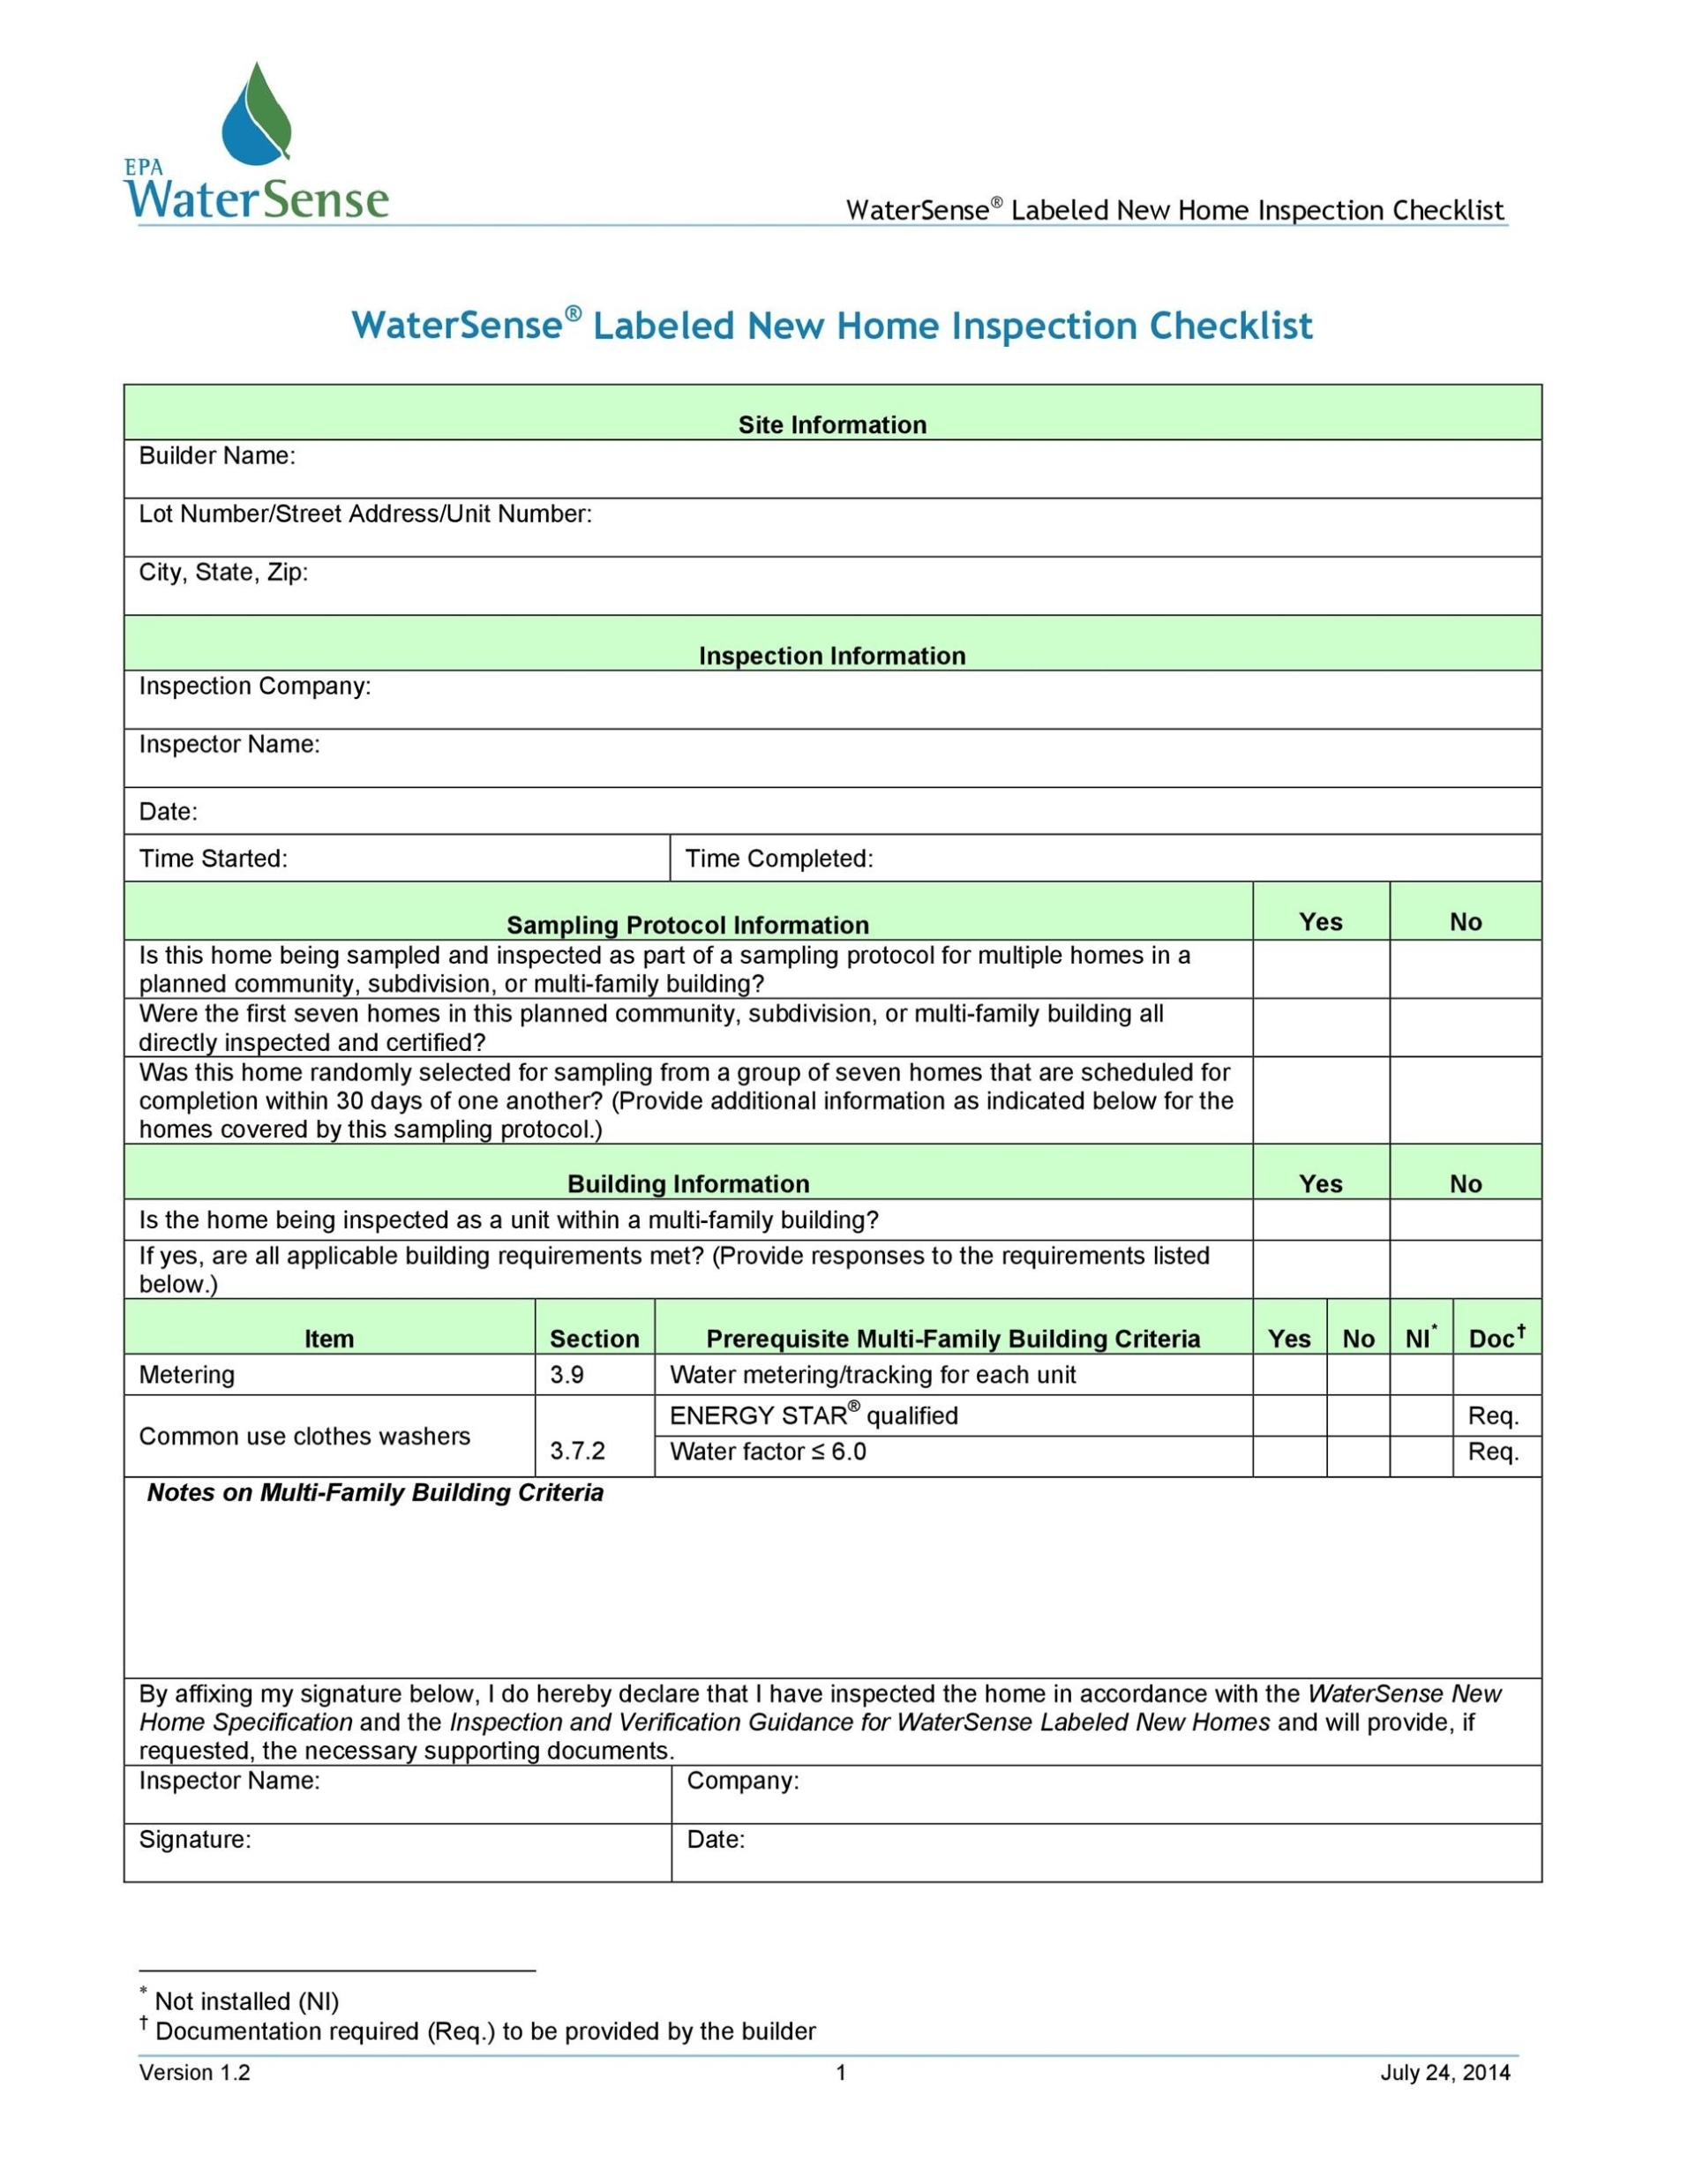 Building Checklist Templates - 18+ Word, Pdf Format Download B22 with Home Inspection Report Template Pdf